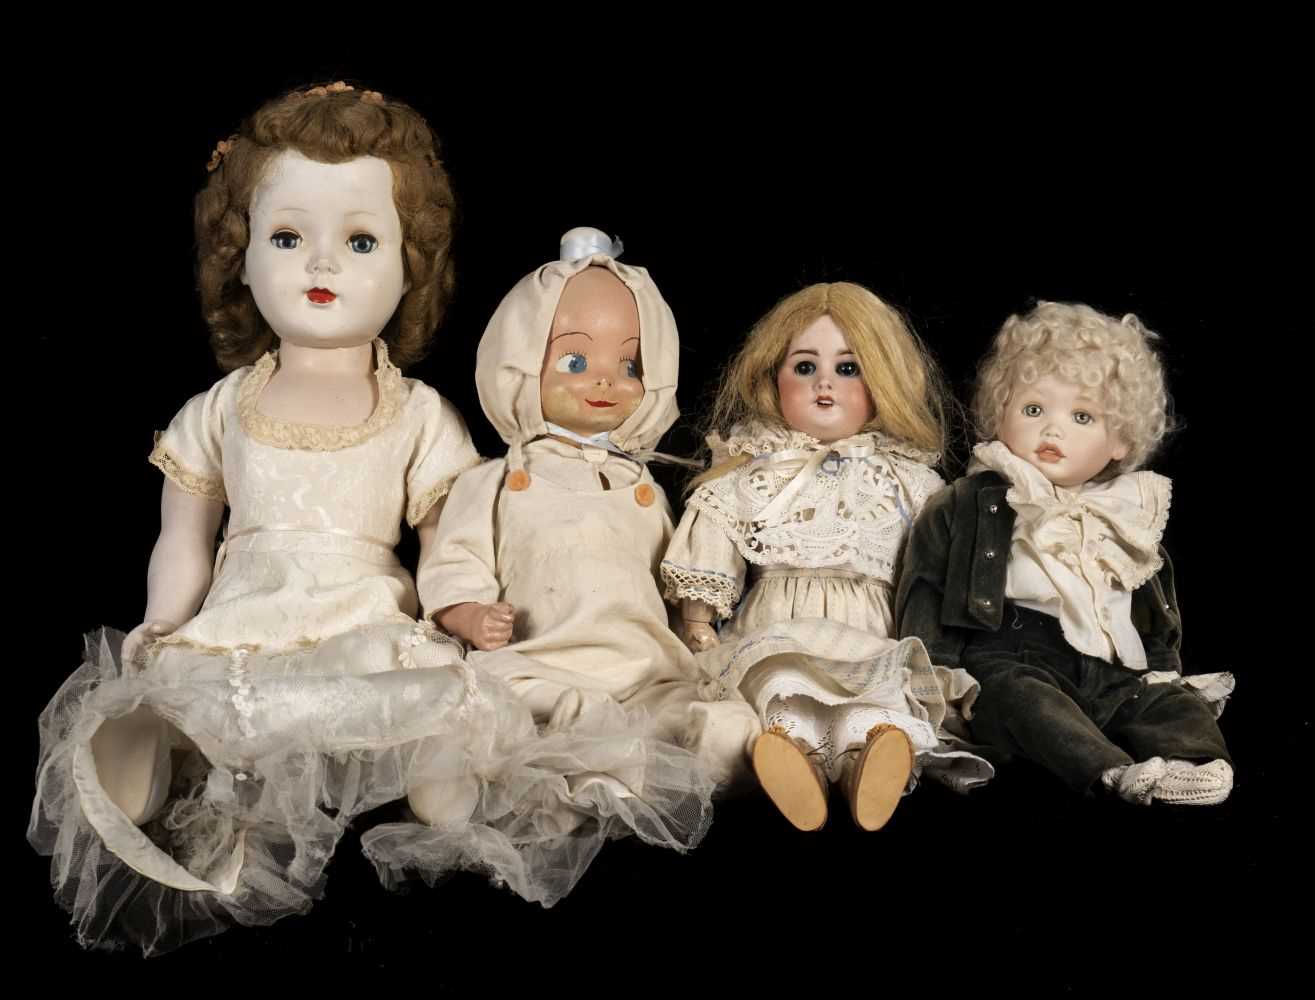 Lot 483 - Dolls. A bisque head doll, French, early 20th century, & 3 others